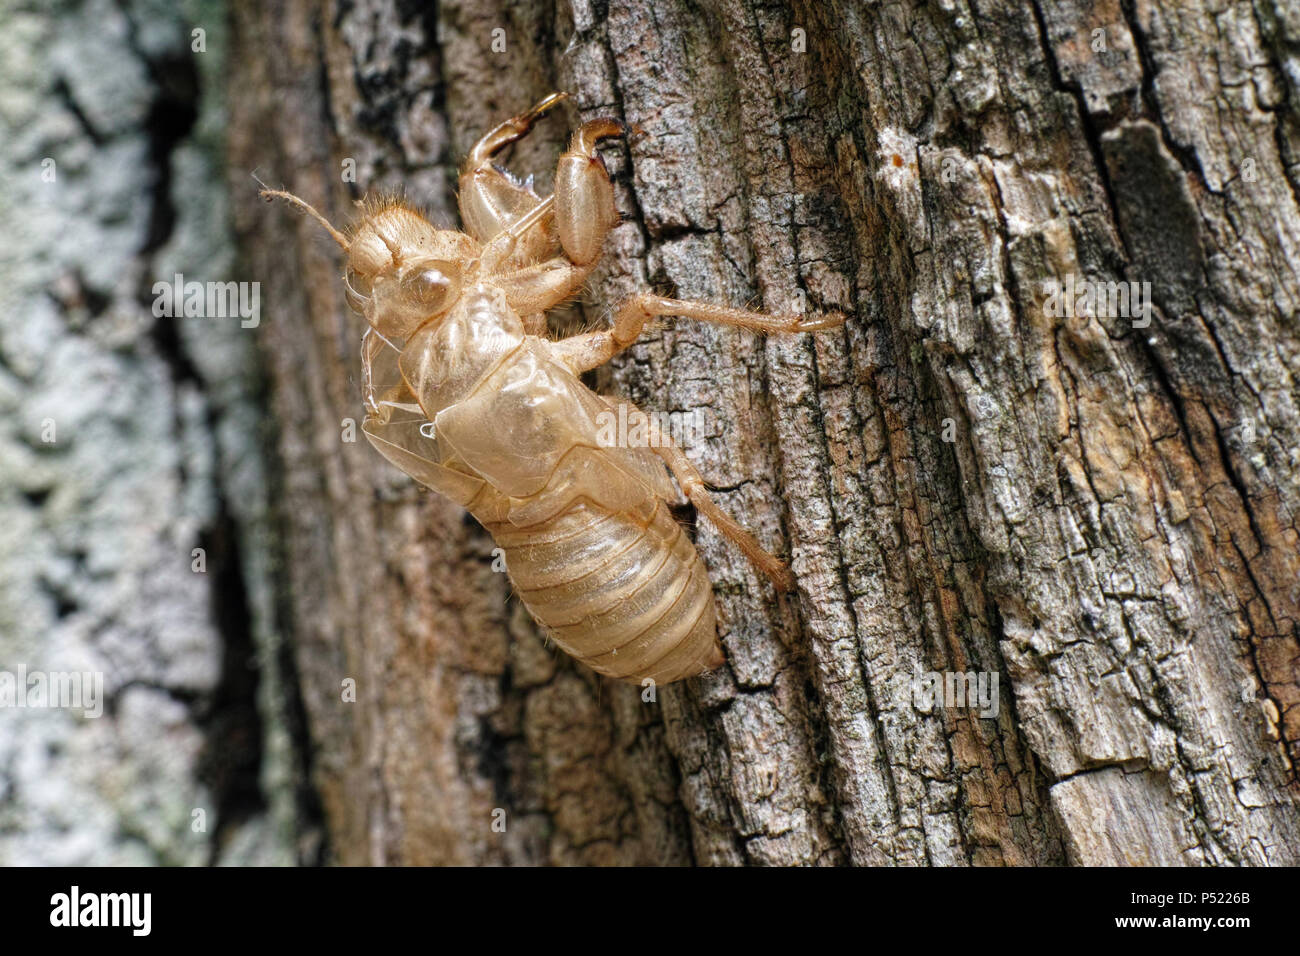 exuvia or nymphal shell of a cicada Stock Photo